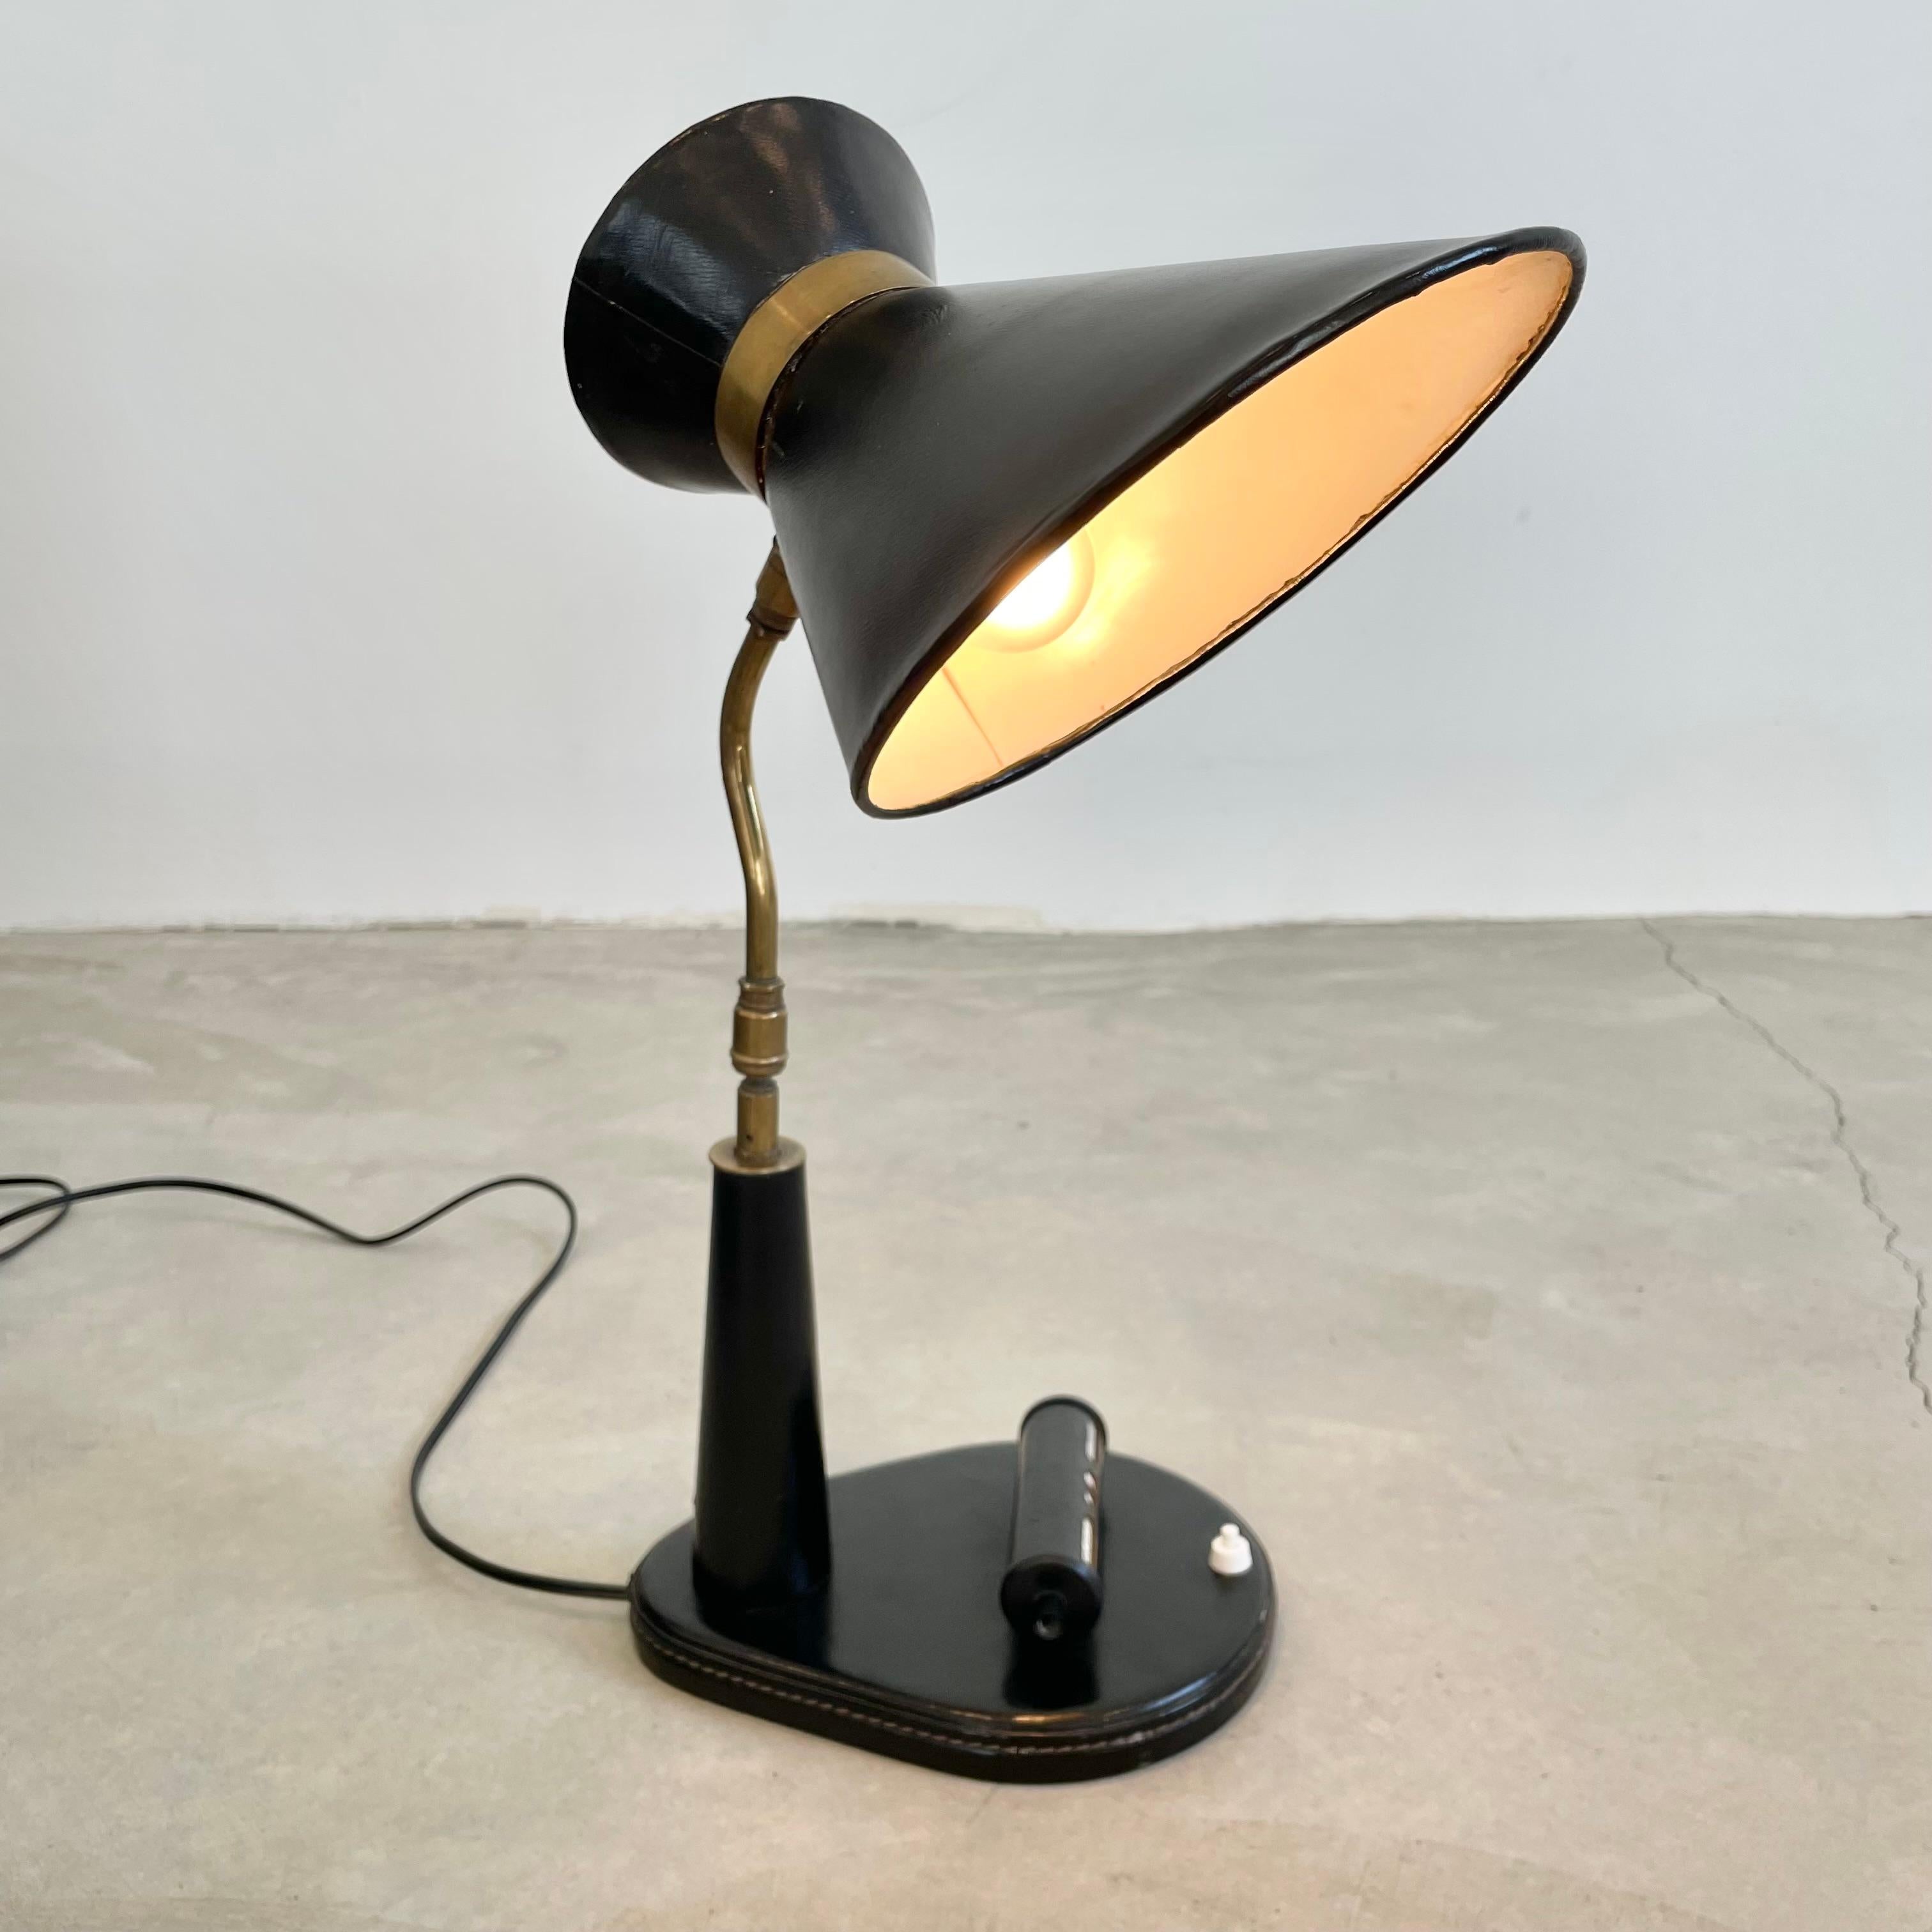 Elegant Jacques Adnet leather table lamp with adjustable date display on the base. Neck is attached at the base and at the top with a brass ball joint which gives it an array of positions you can adjust it to. The frame is completely wrapped in a